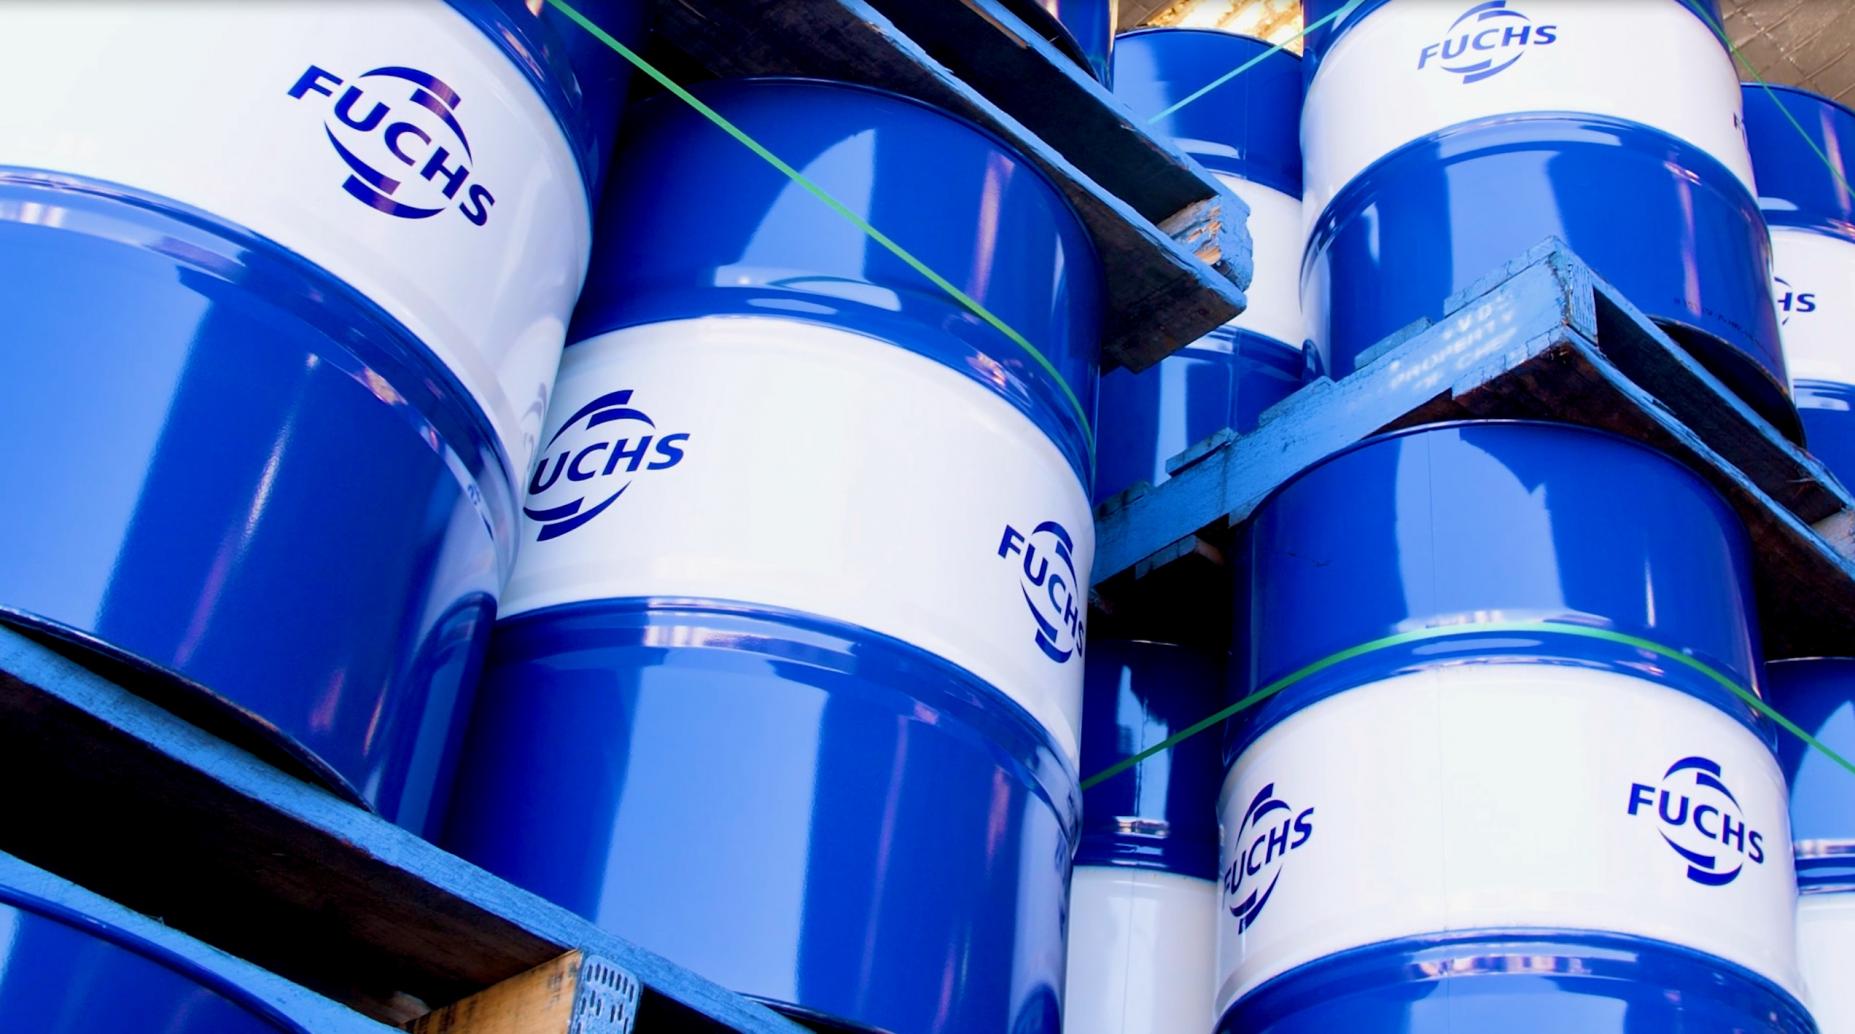 Select Harvests switched to FUCHS lubricants two years to maintain its farm machinery fleet